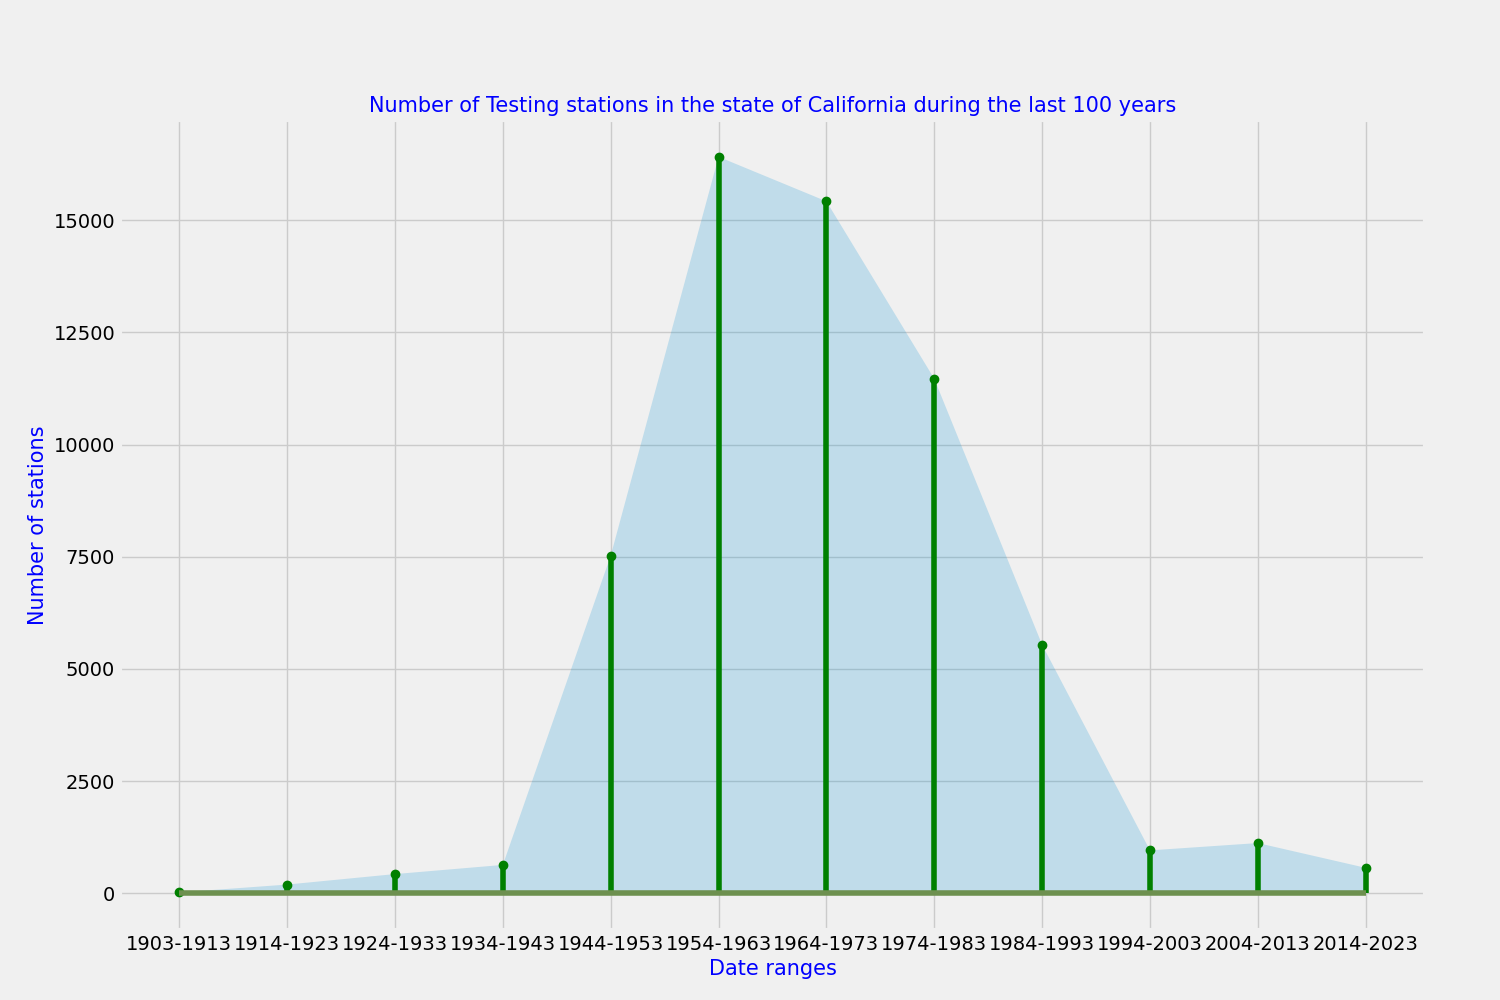 number_of_testing_stations_over_100_years.png